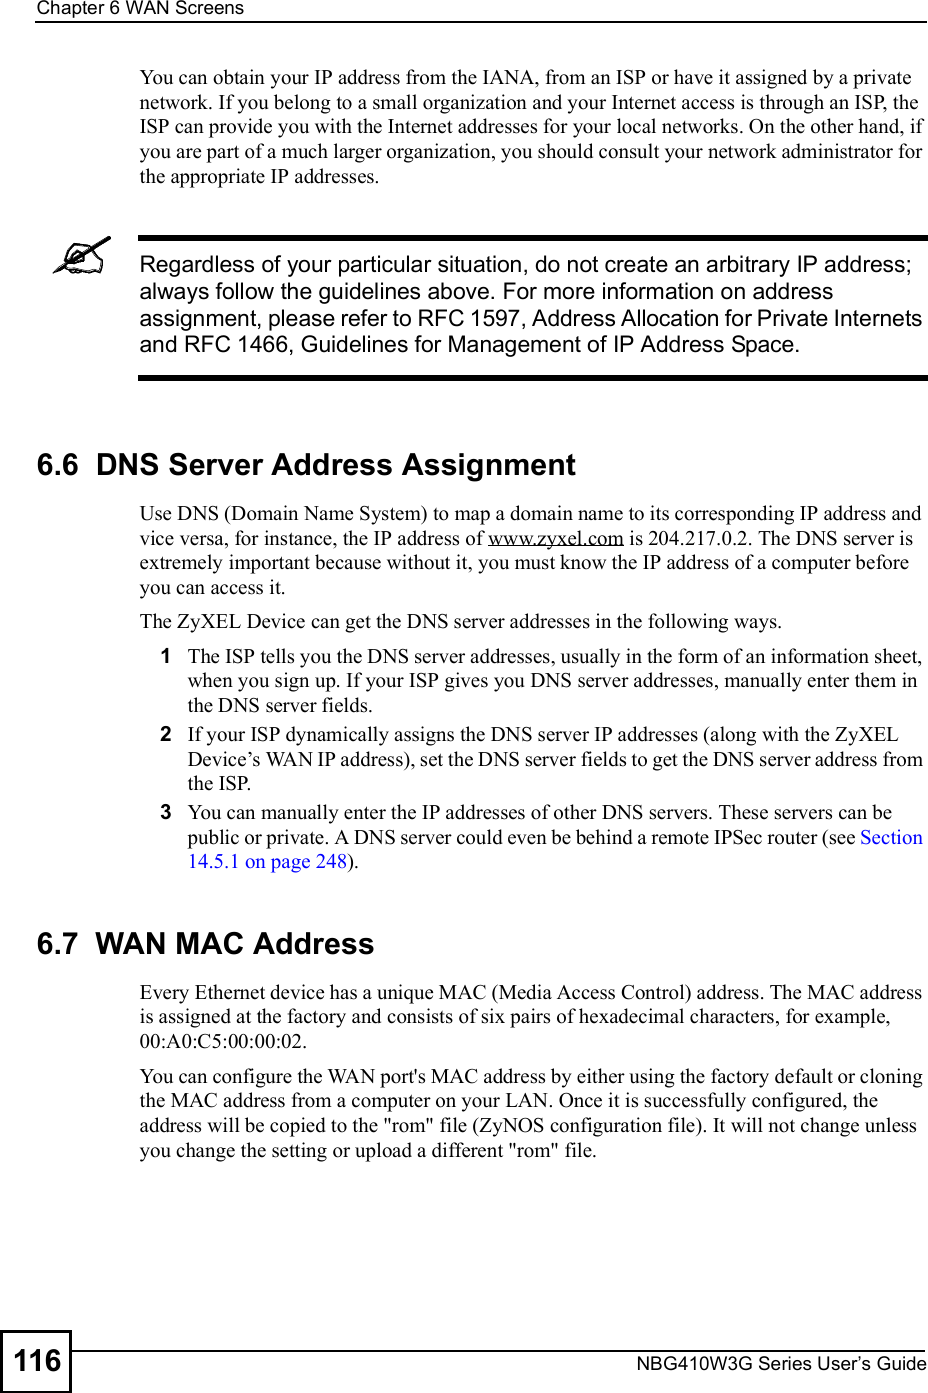 Chapter 6WAN ScreensNBG410W3G Series User s Guide116You can obtain your IP address from the IANA, from an ISP or have it assigned by a private network. If you belong to a small organization and your Internet access is through an ISP, the ISP can provide you with the Internet addresses for your local networks. On the other hand, if you are part of a much larger organization, you should consult your network administrator for the appropriate IP addresses.Regardless of your particular situation, do not create an arbitrary IP address; always follow the guidelines above. For more information on address assignment, please refer to RFC 1597, Address Allocation for Private Internets and RFC 1466, Guidelines for Management of IP Address Space.6.6  DNS Server Address AssignmentUse DNS (Domain Name System) to map a domain name to its corresponding IP address and vice versa, for instance, the IP address of www.zyxel.com is 204.217.0.2. The DNS server is extremely important because without it, you must know the IP address of a computer before you can access it. The ZyXEL Device can get the DNS server addresses in the following ways.1The ISP tells you the DNS server addresses, usually in the form of an information sheet, when you sign up. If your ISP gives you DNS server addresses, manually enter them in the DNS server fields.2If your ISP dynamically assigns the DNS server IP addresses (along with the ZyXEL Device!s WAN IP address), set the DNS server fields to get the DNS server address from the ISP. 3You can manually enter the IP addresses of other DNS servers. These servers can be public or private. A DNS server could even be behind a remote IPSec router (see Section 14.5.1 on page 248).6.7  WAN MAC AddressEvery Ethernet device has a unique MAC (Media Access Control) address. The MAC address is assigned at the factory and consists of six pairs of hexadecimal characters, for example, 00:A0:C5:00:00:02.You can configure the WAN port&apos;s MAC address by either using the factory default or cloning the MAC address from a computer on your LAN. Once it is successfully configured, the address will be copied to the &quot;rom&quot; file (ZyNOS configuration file). It will not change unless you change the setting or upload a different &quot;rom&quot; file.